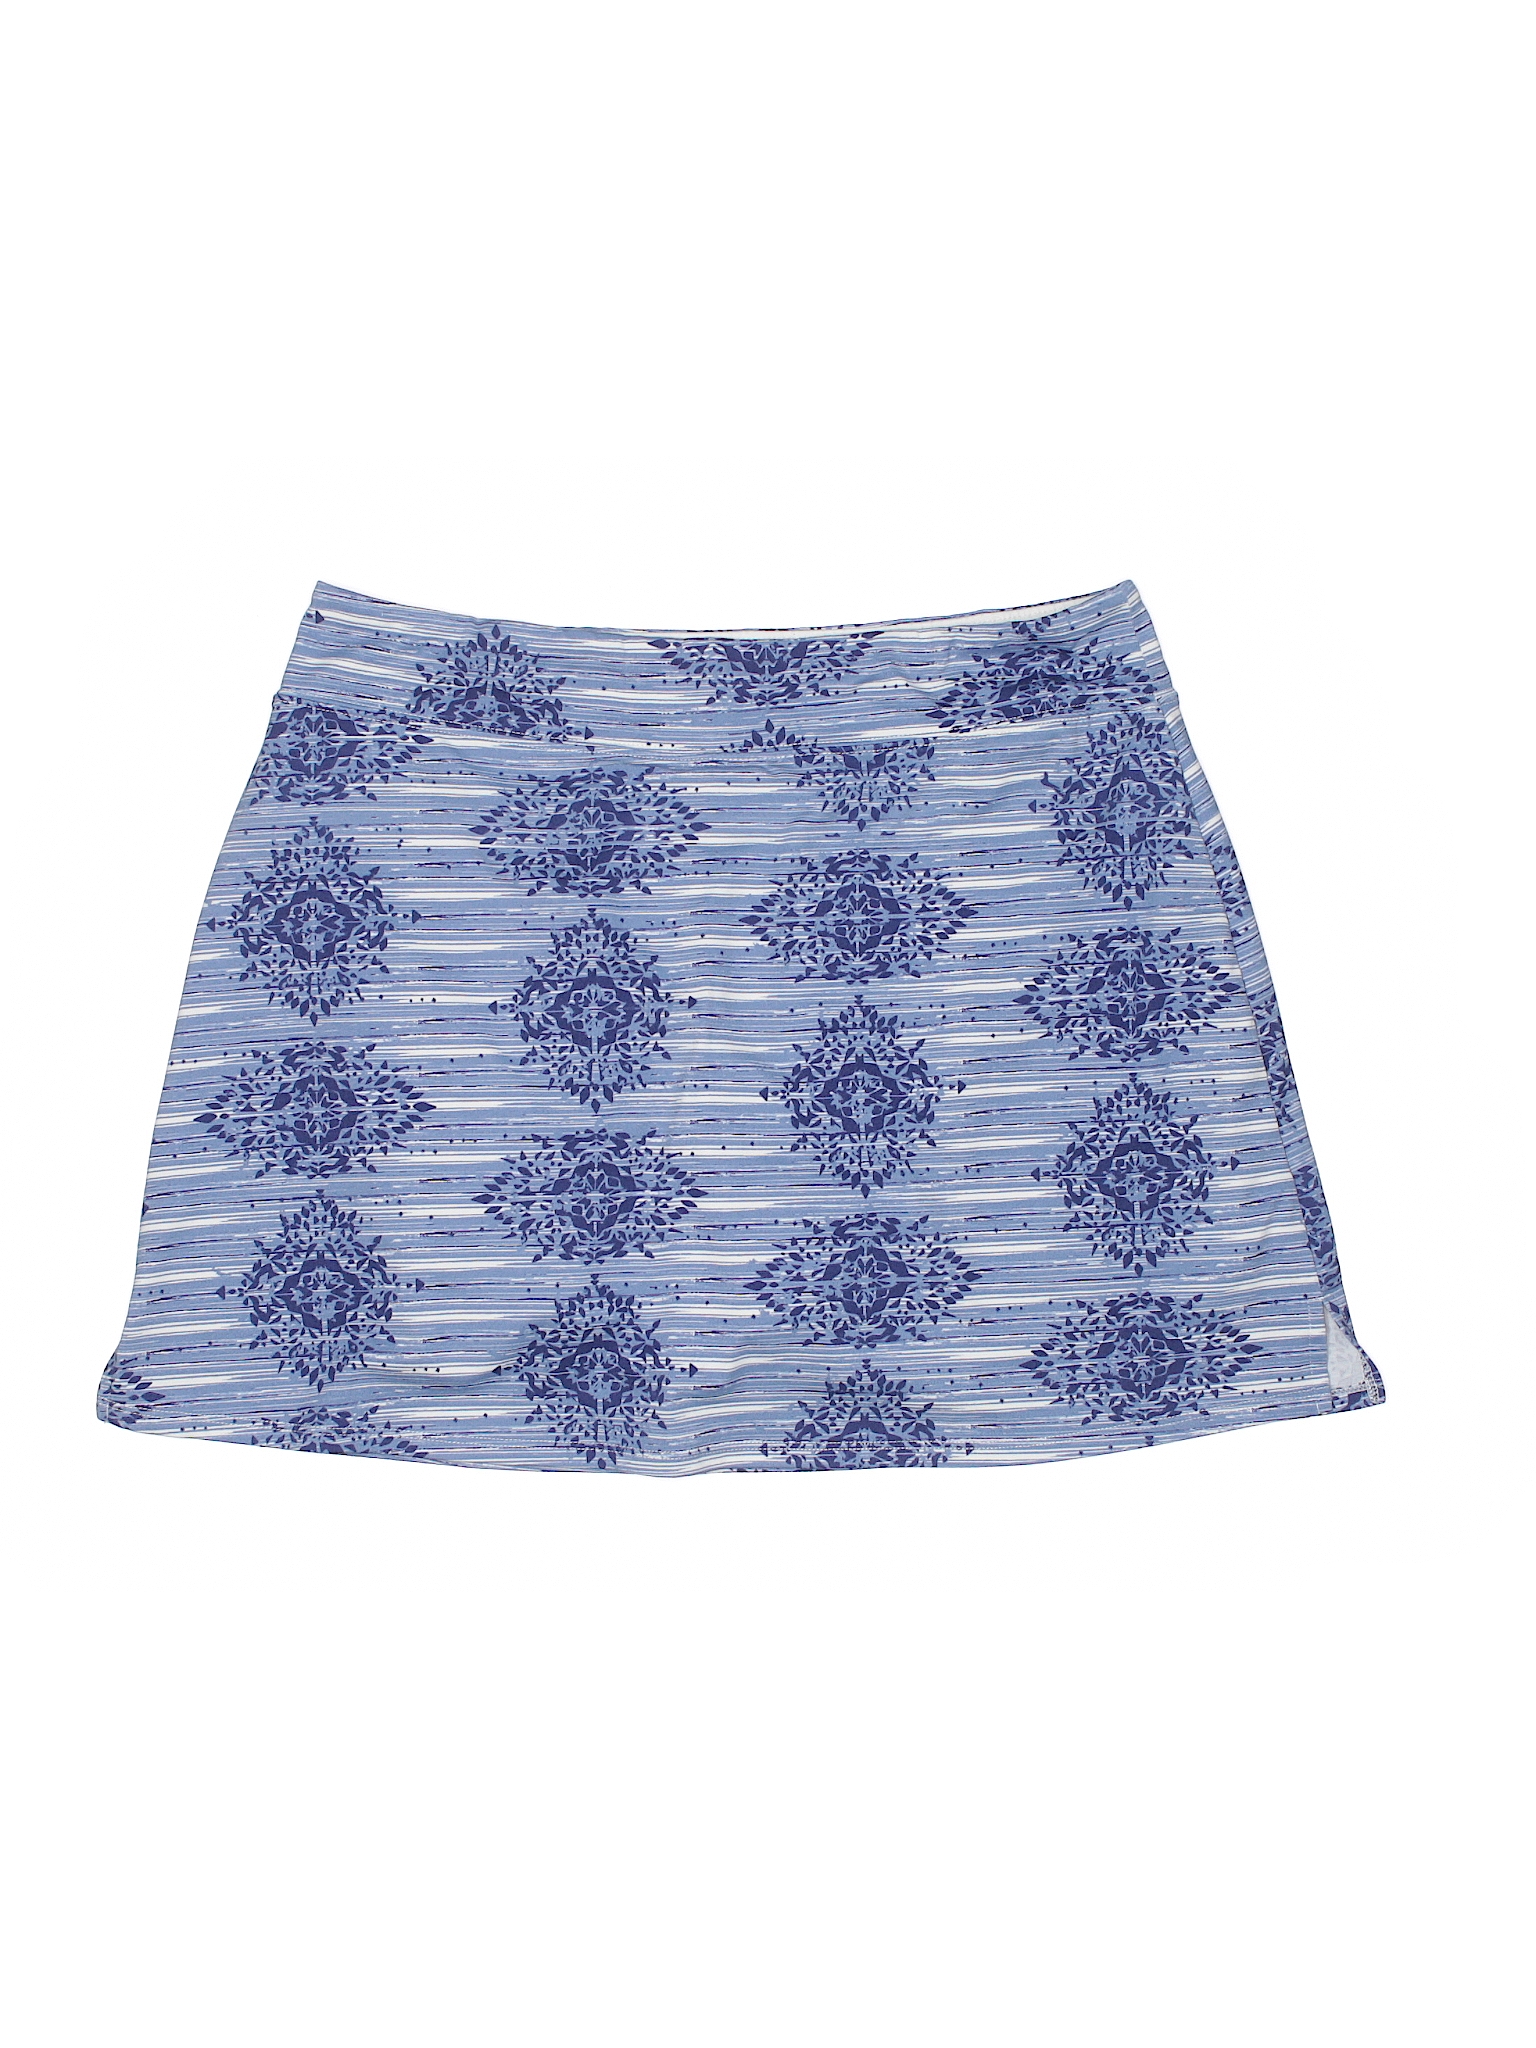 Tranquility by Colorado Clothing Print Dark Blue Skort Size L - 66% off ...